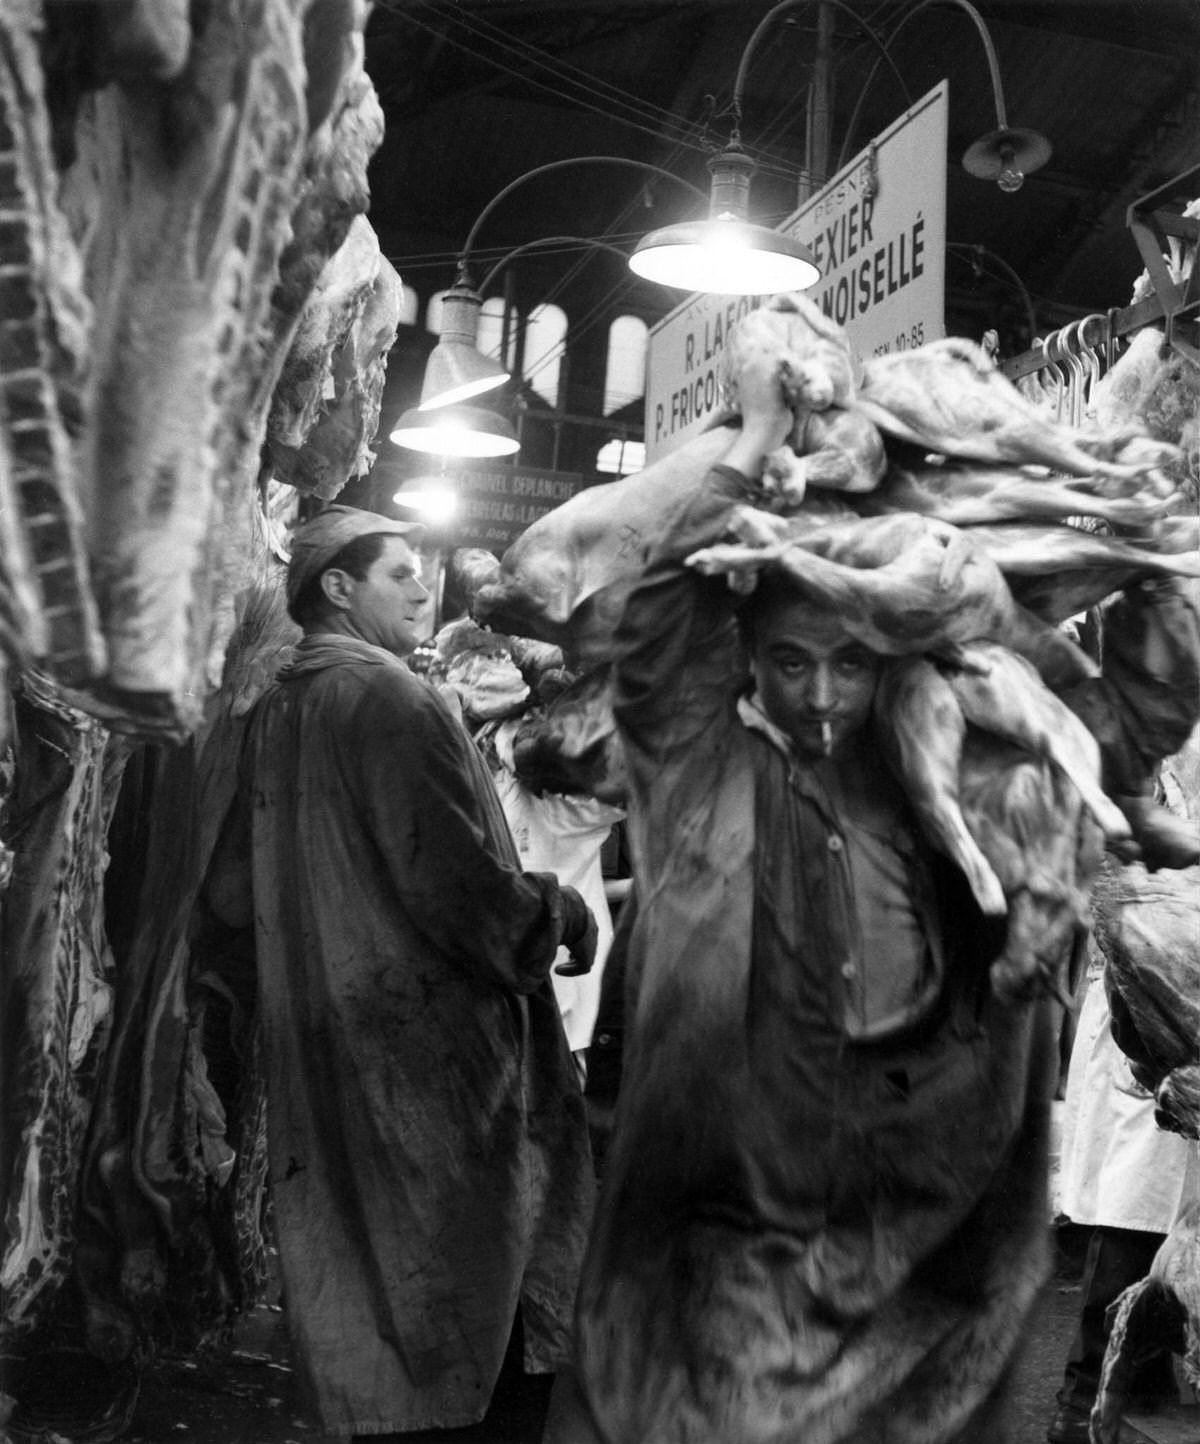 Market porter in the meat hall of Les Halles, which was historically the traditional central market of Paris, those men were called "Forts des Halles", 1955